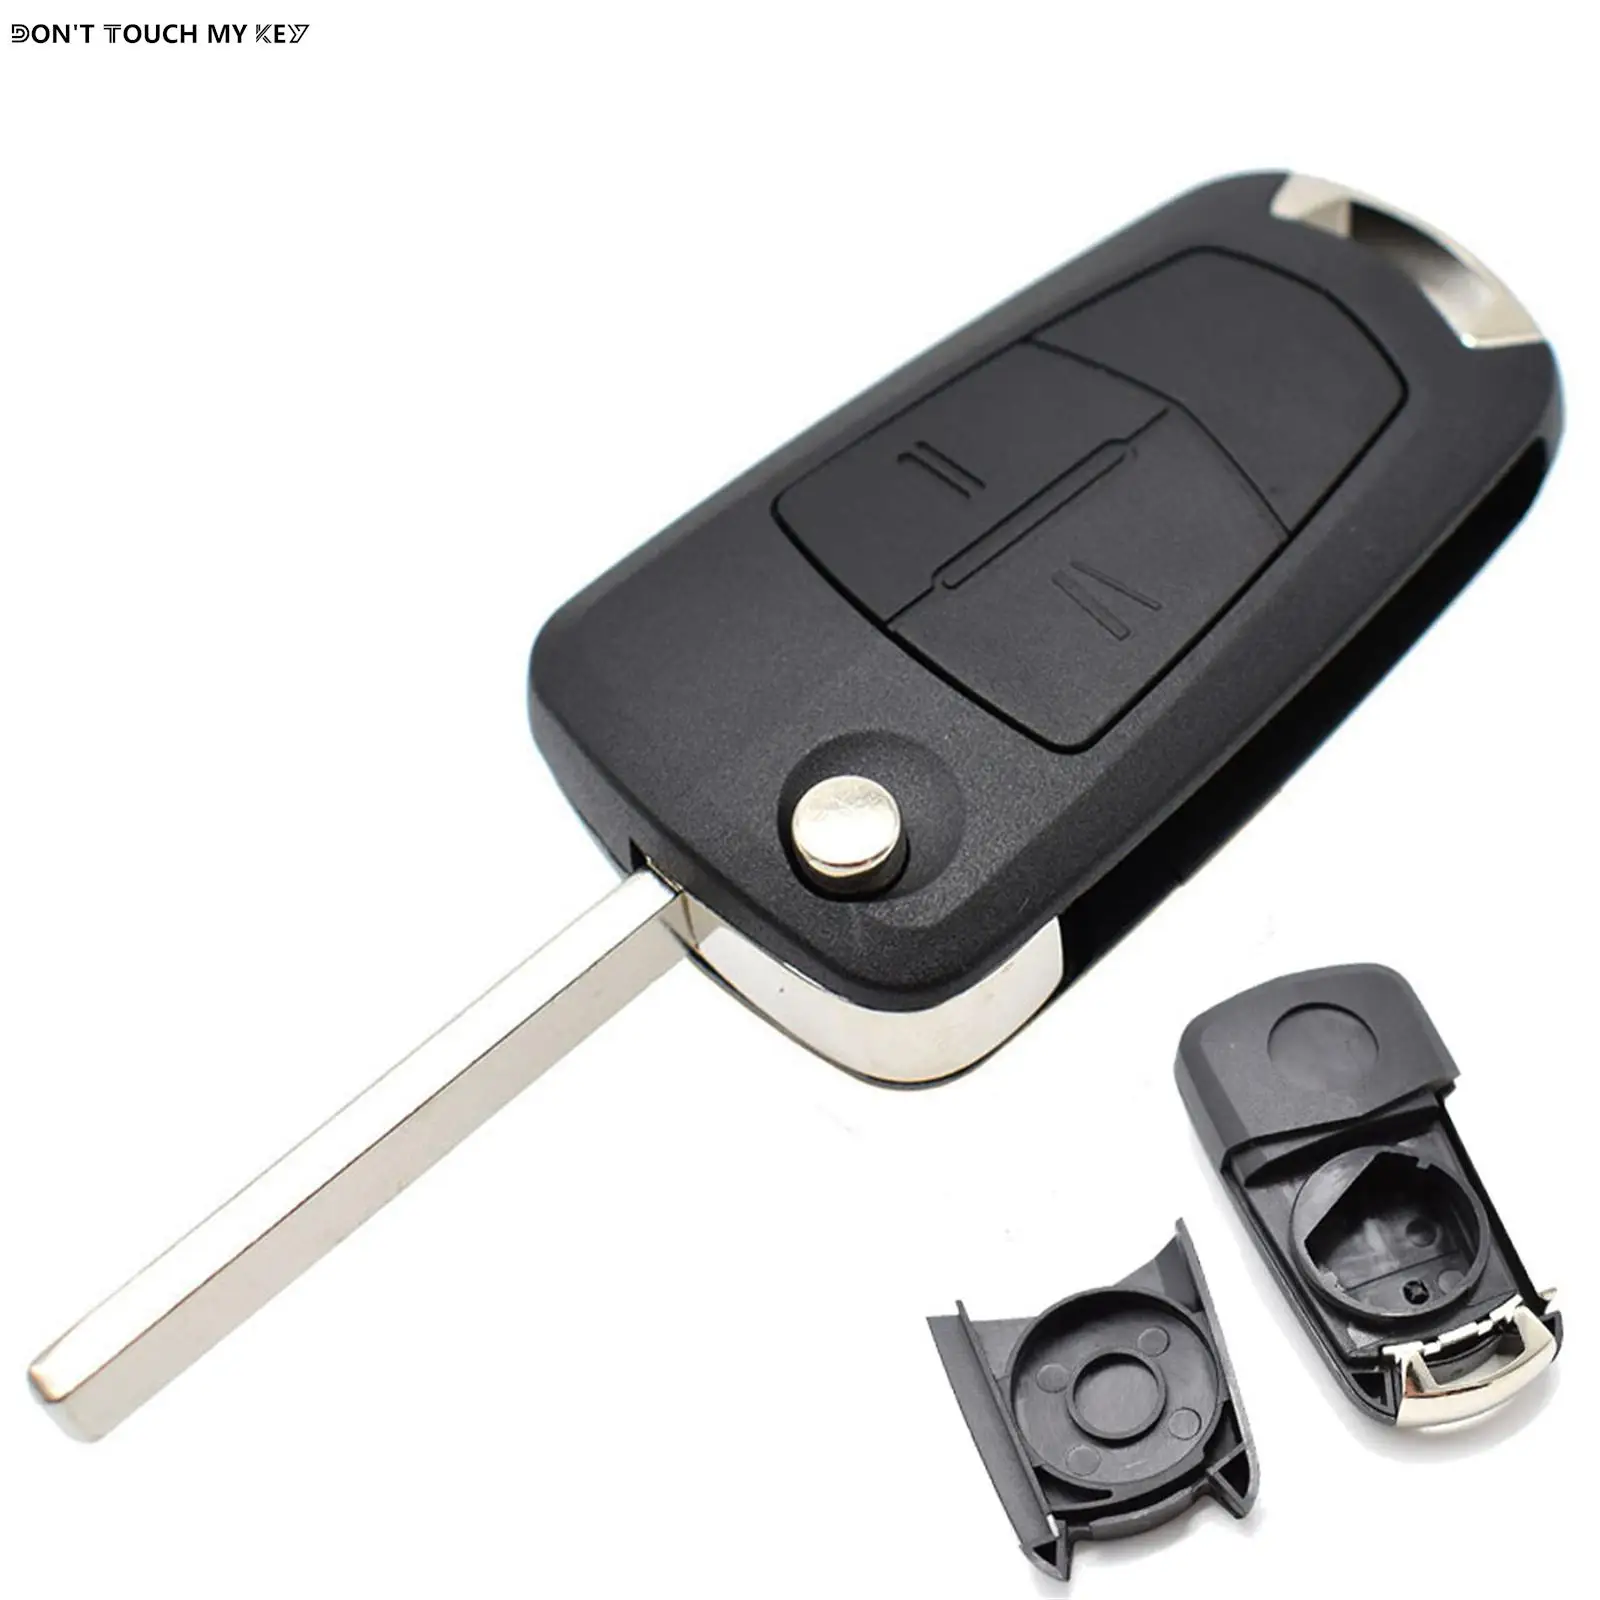 

Car Remote Key Fob Shell Case For Vauxhall Opel Corsa D Astra H Vectra Signum Zafira B Combo Meriva A Case 2 Button Repair Kit